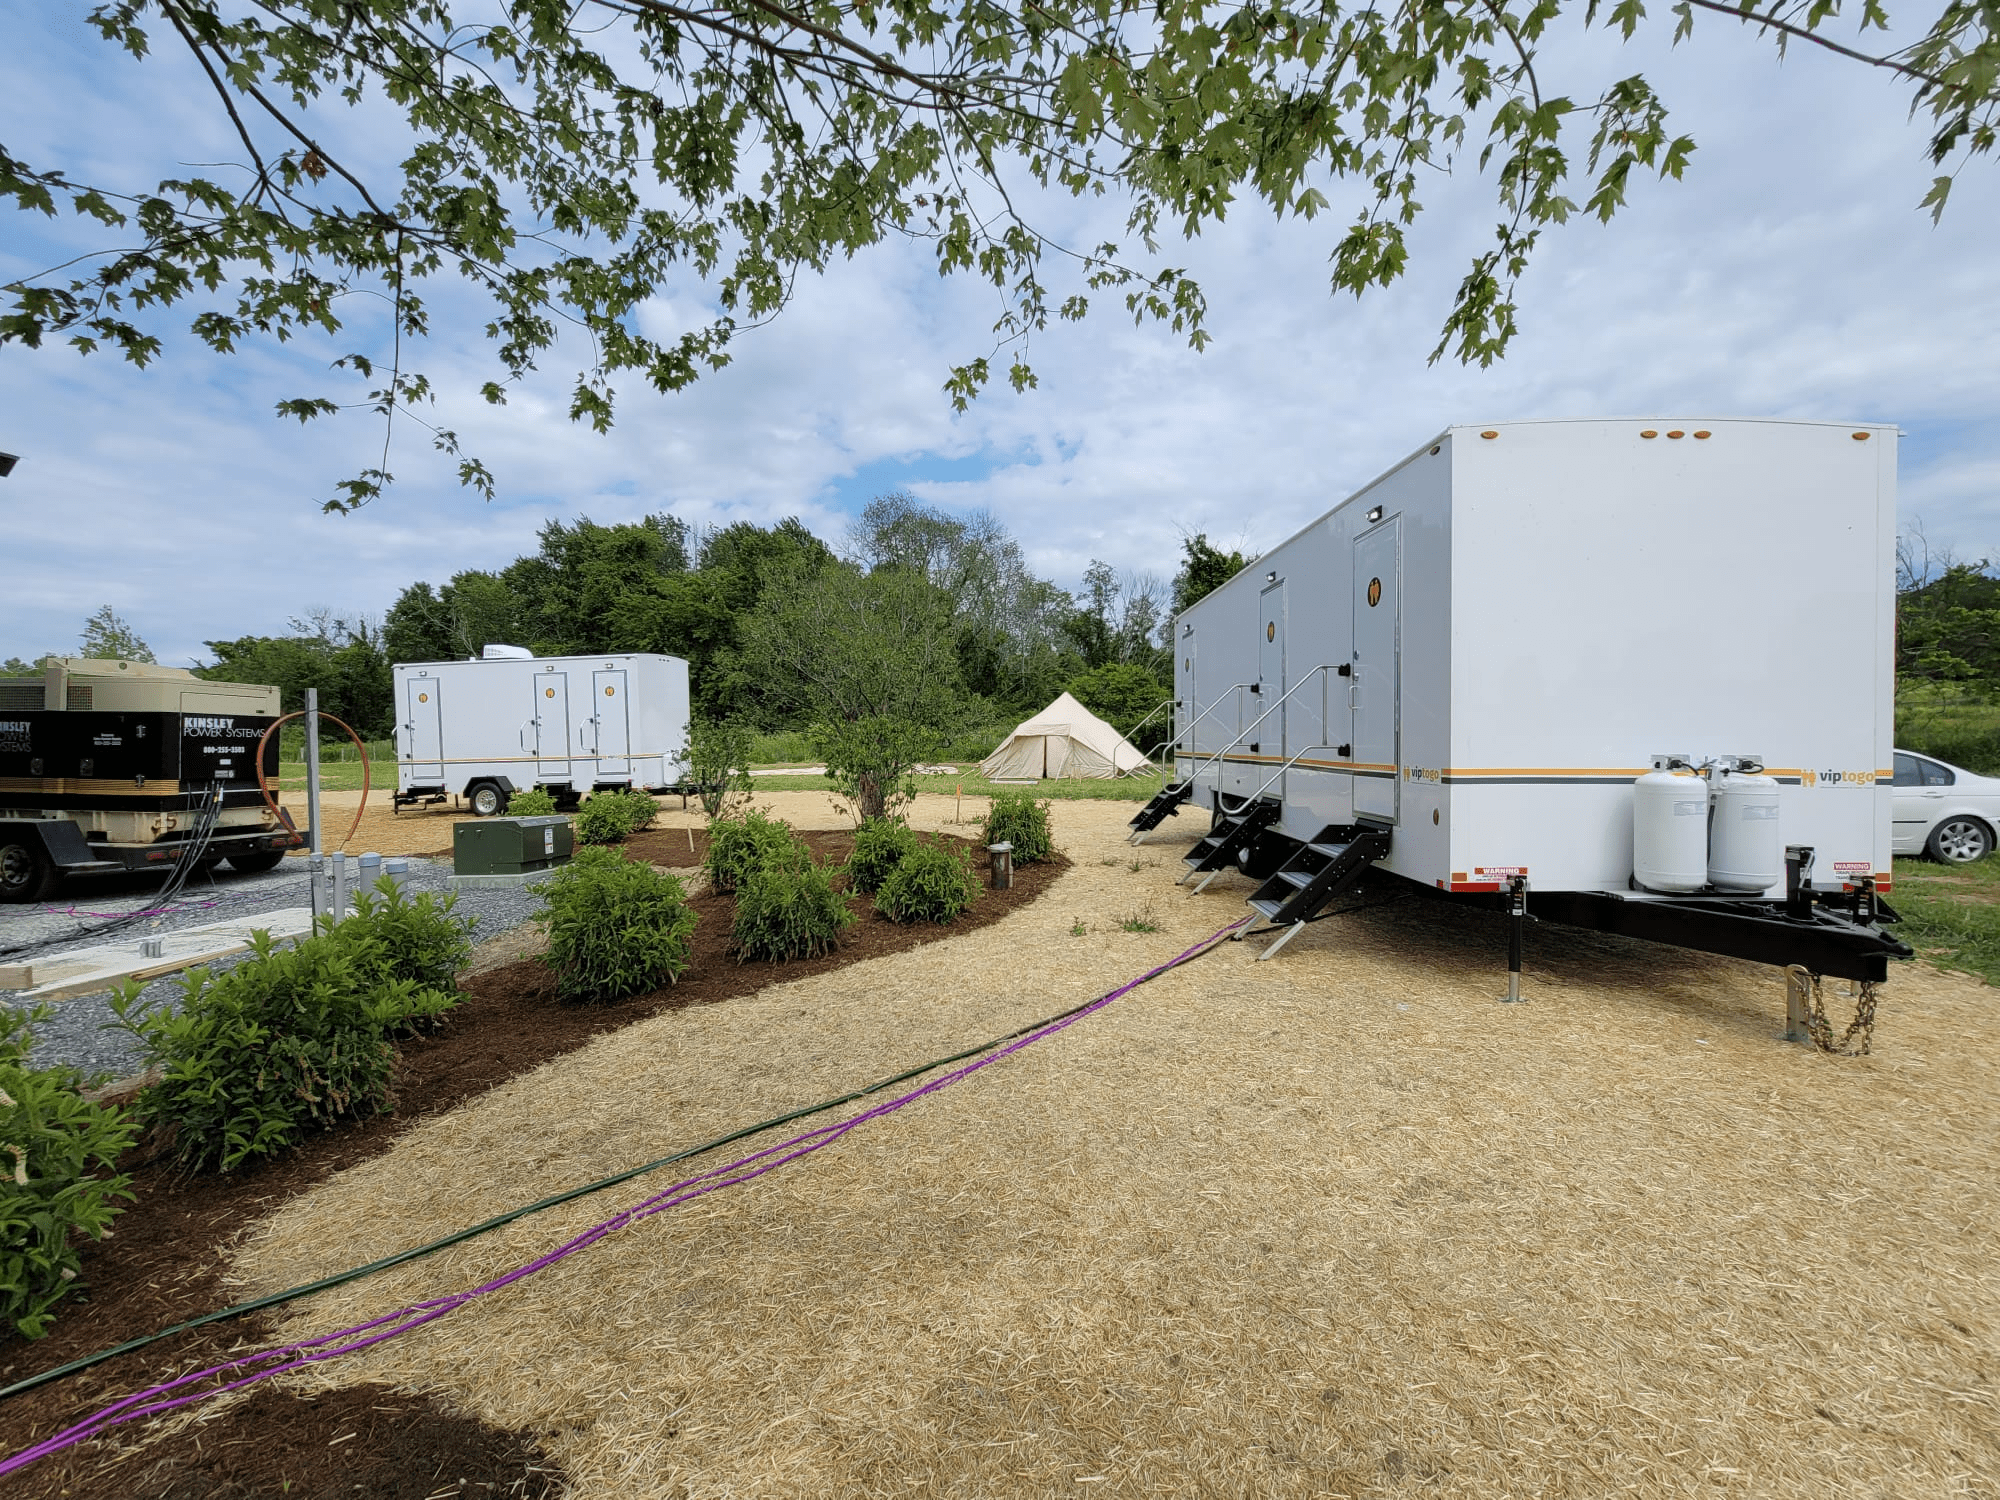 VIP To Go’s premium restroom trailers at an outdoor event